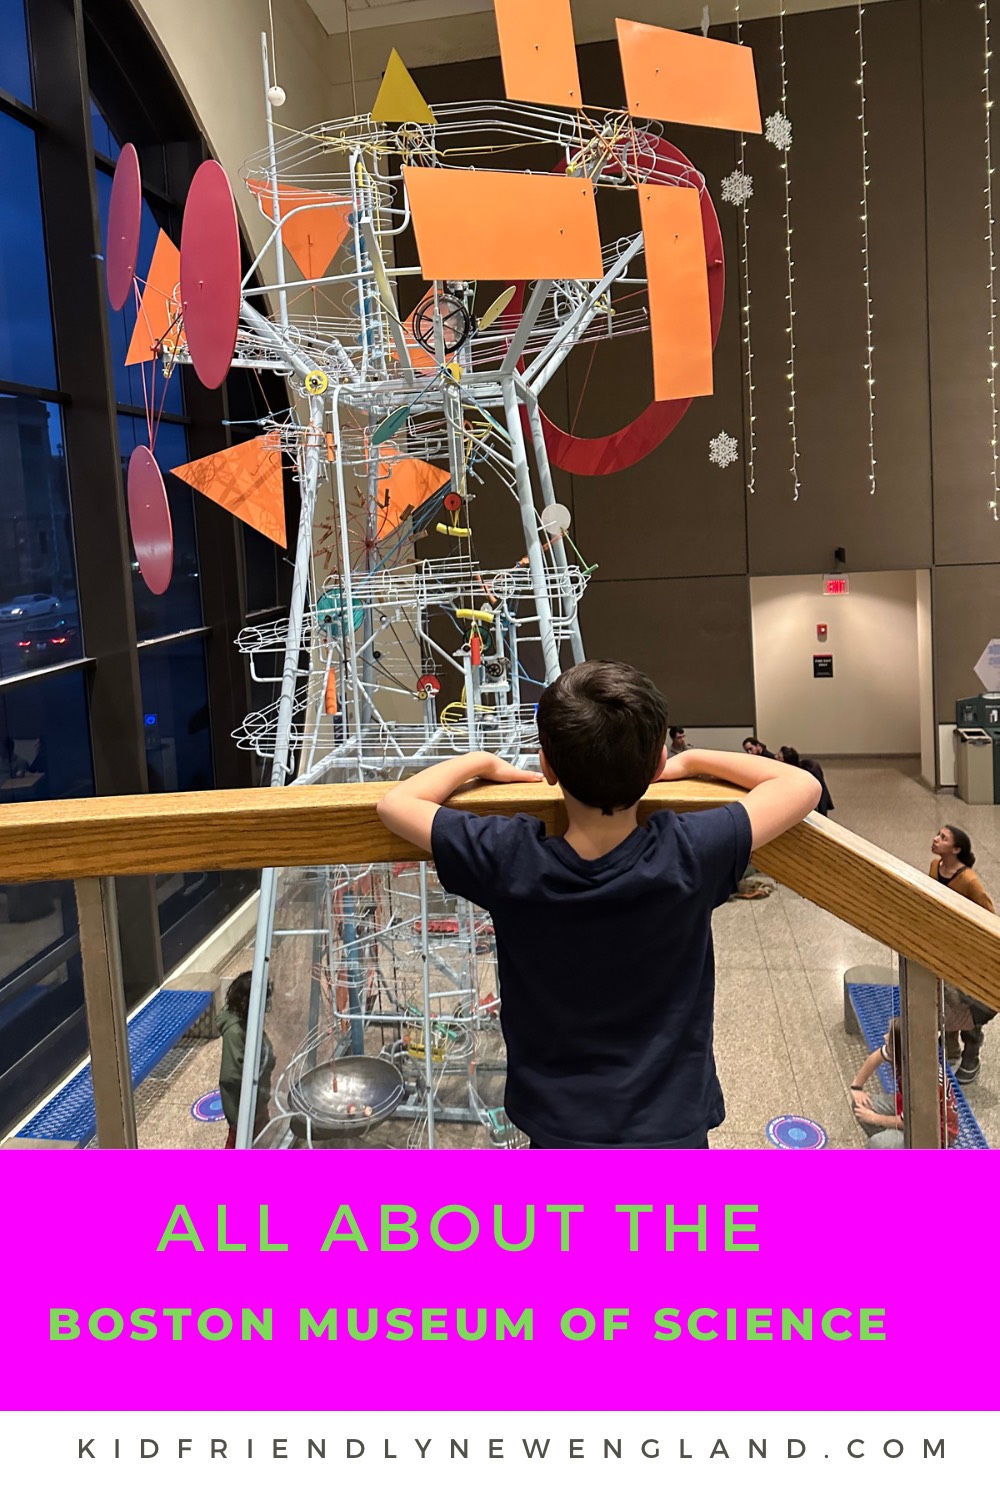 tinker time is always fun at Boston Museum of Science